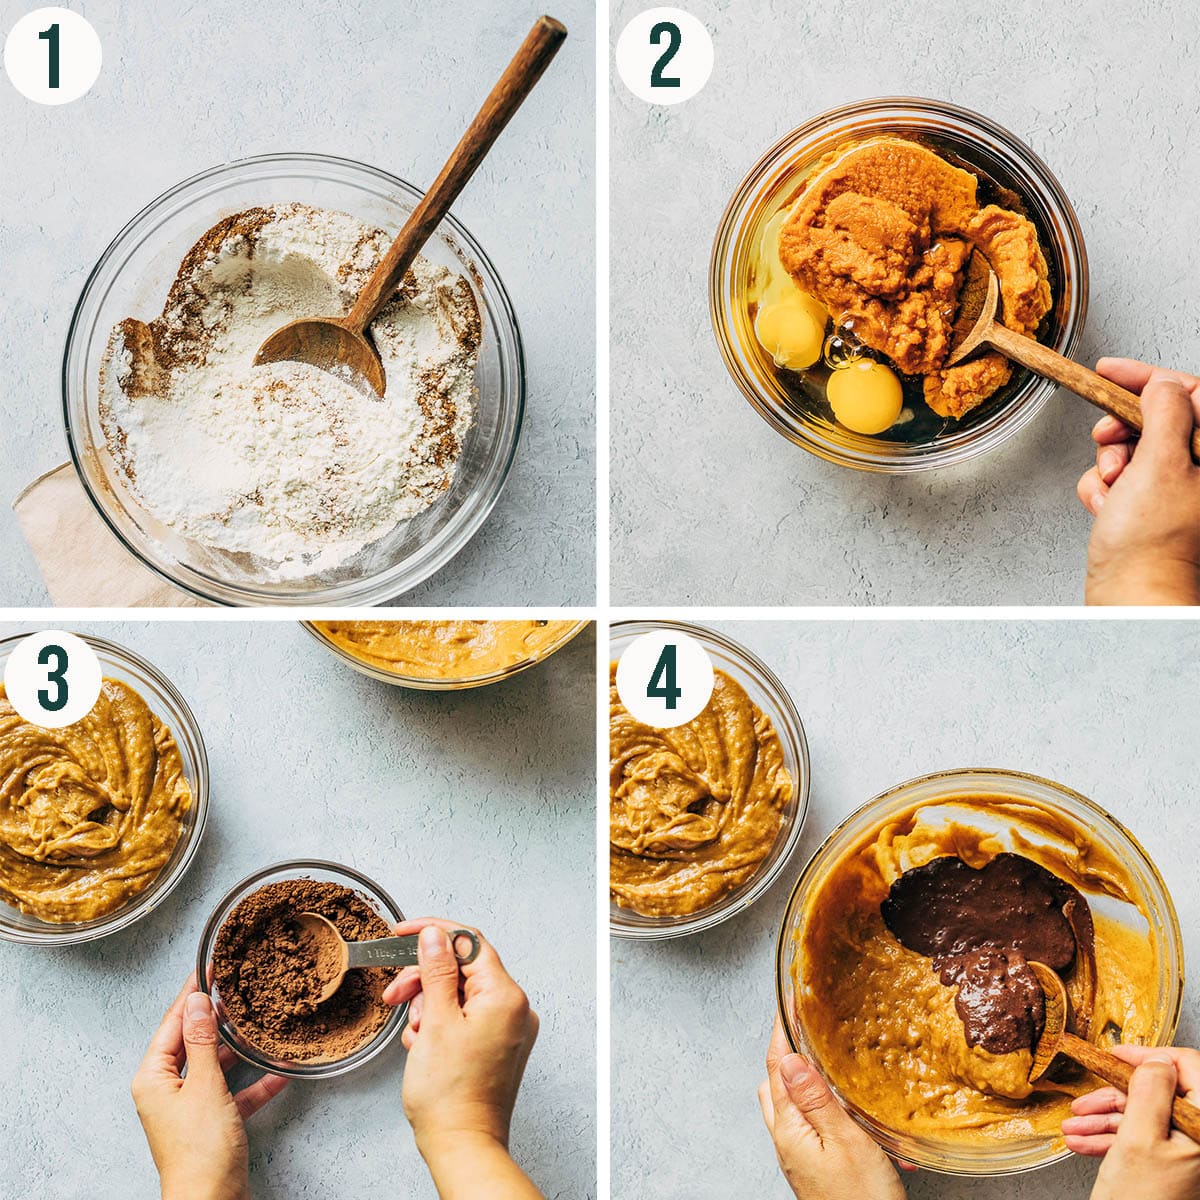 Marble cake steps 1 to 4, mixing batter and adding chocolate to one bowl.